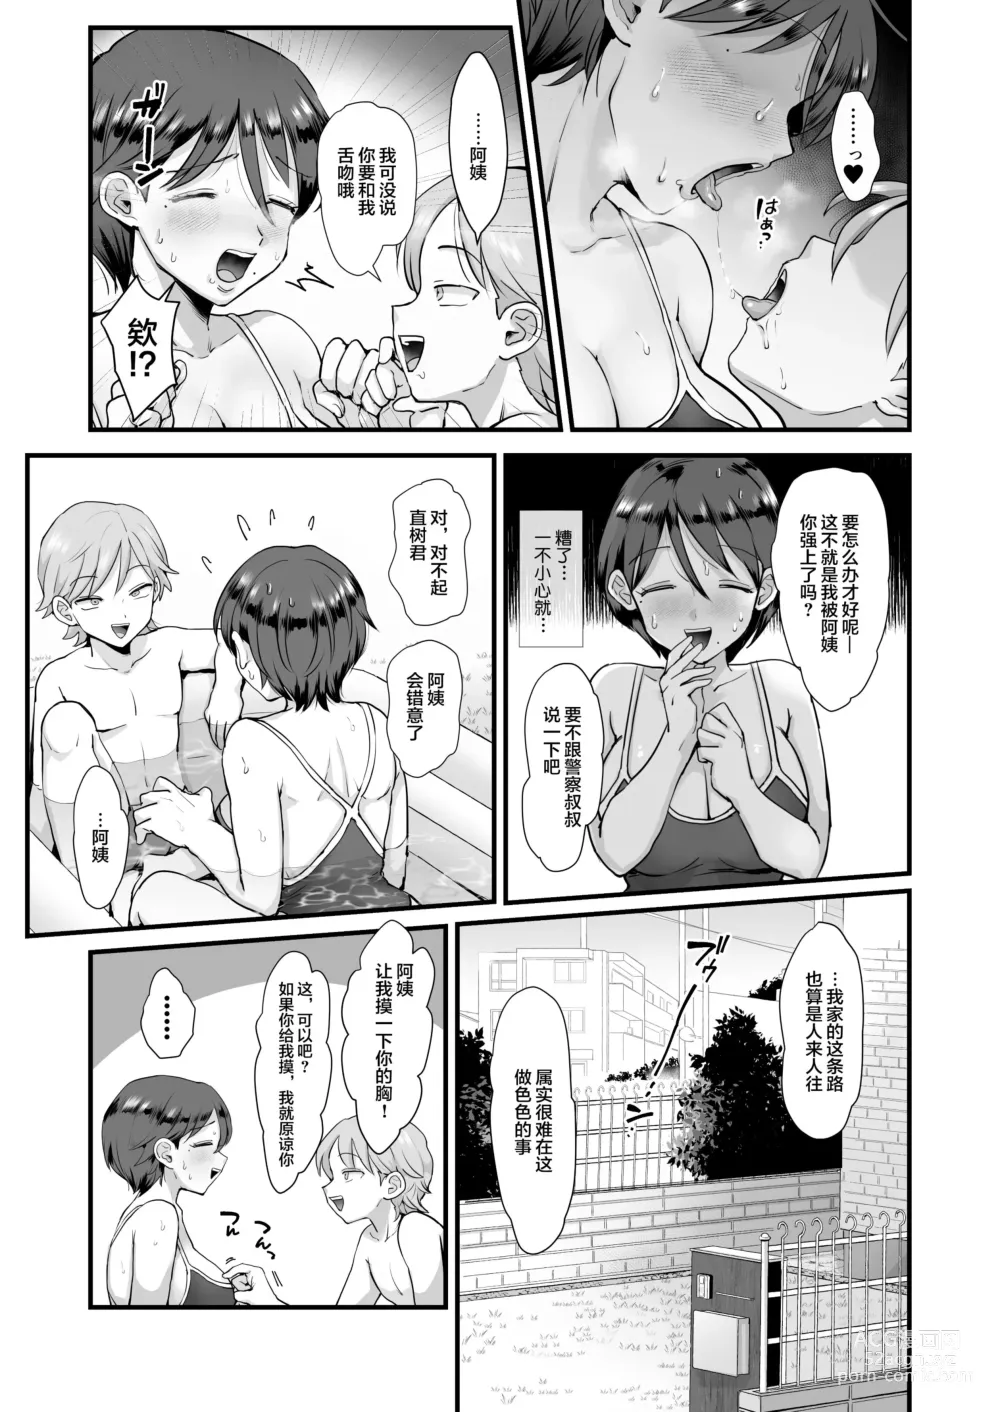 Page 14 of doujinshi sinistra (Eda)] Continued: A laid-back big-breasted mom. [Chinese translation